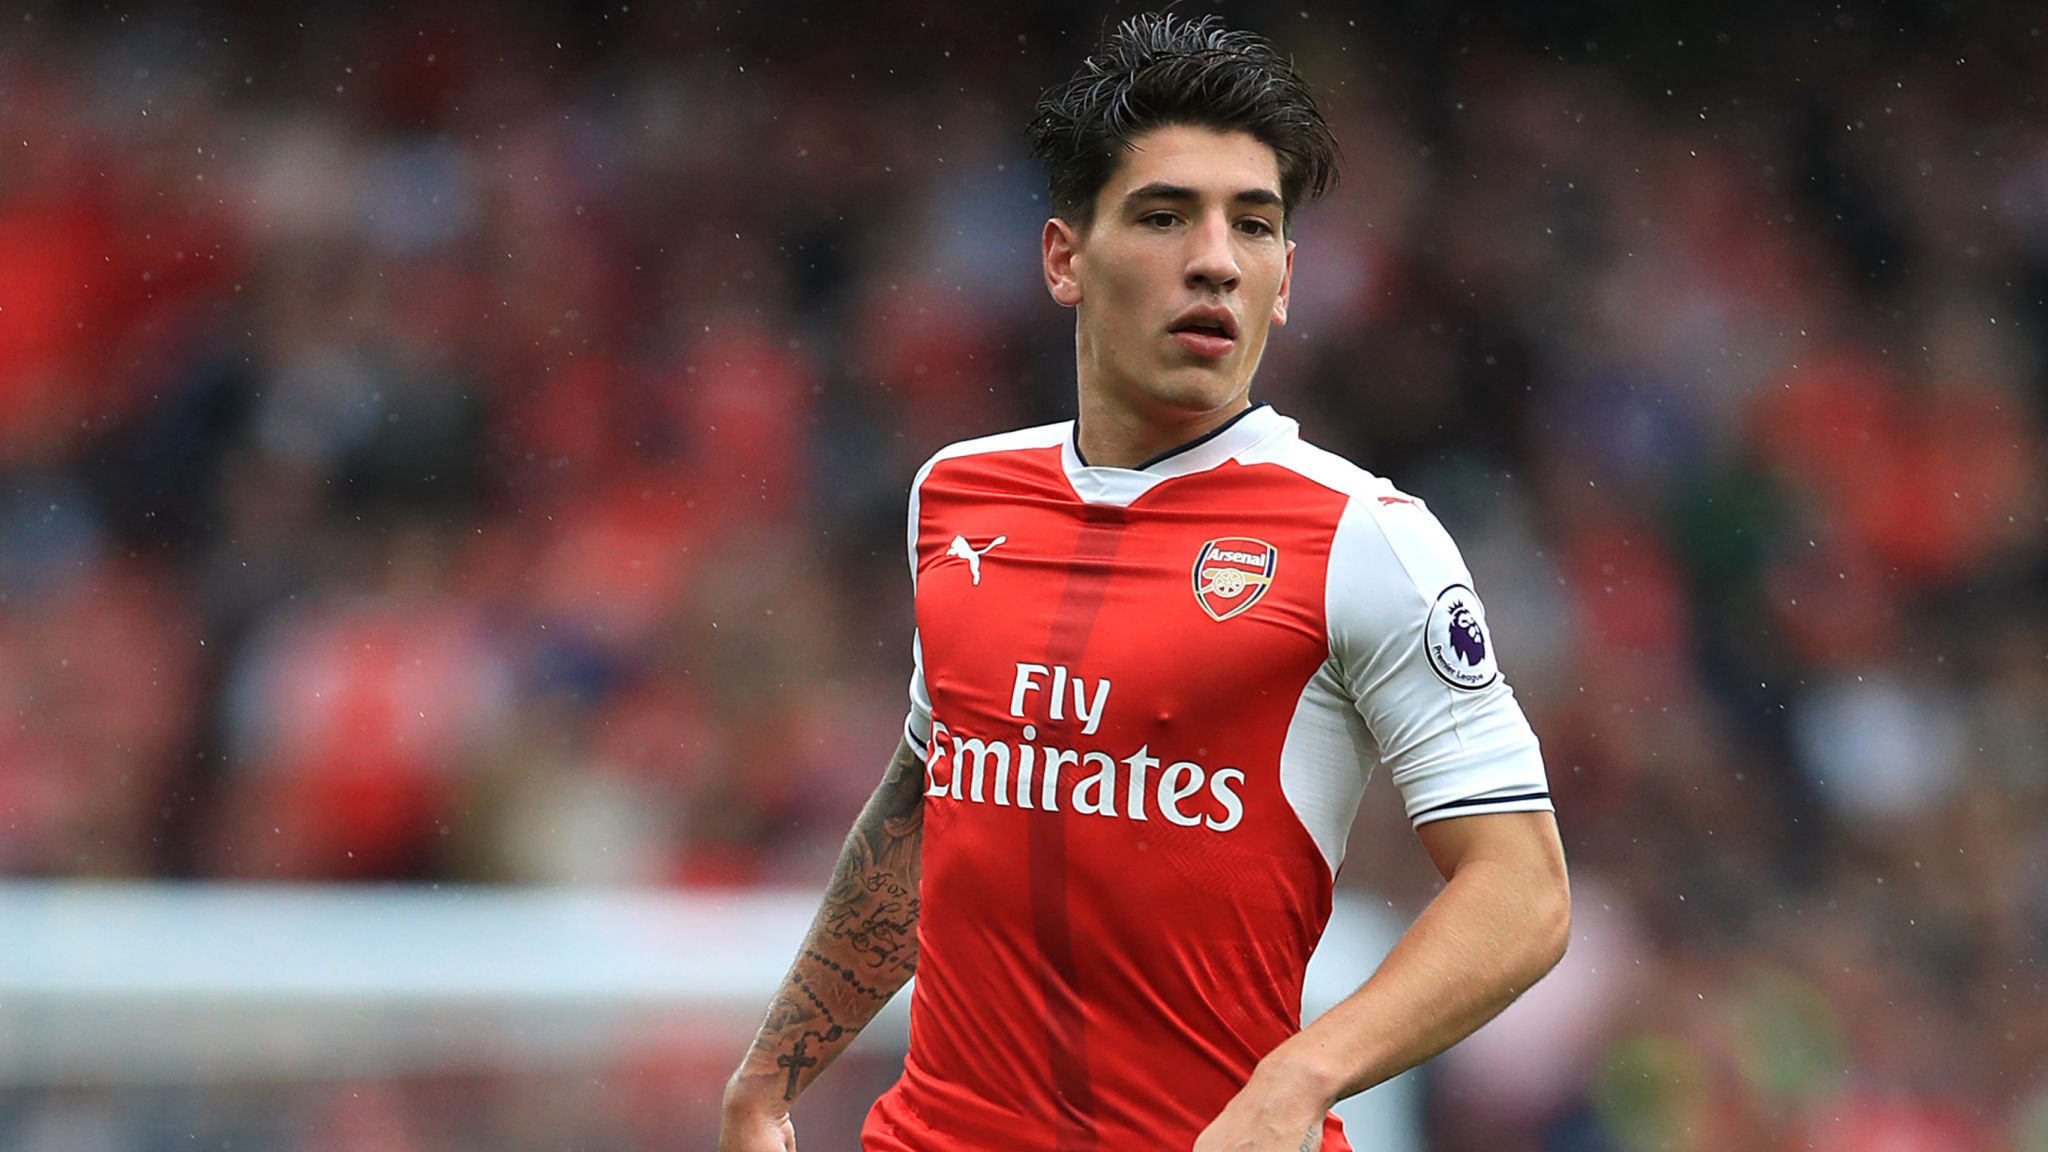 Arsenal S Hector Bellerin Is Of Interest To Manchester - Arsenal - HD Wallpaper 